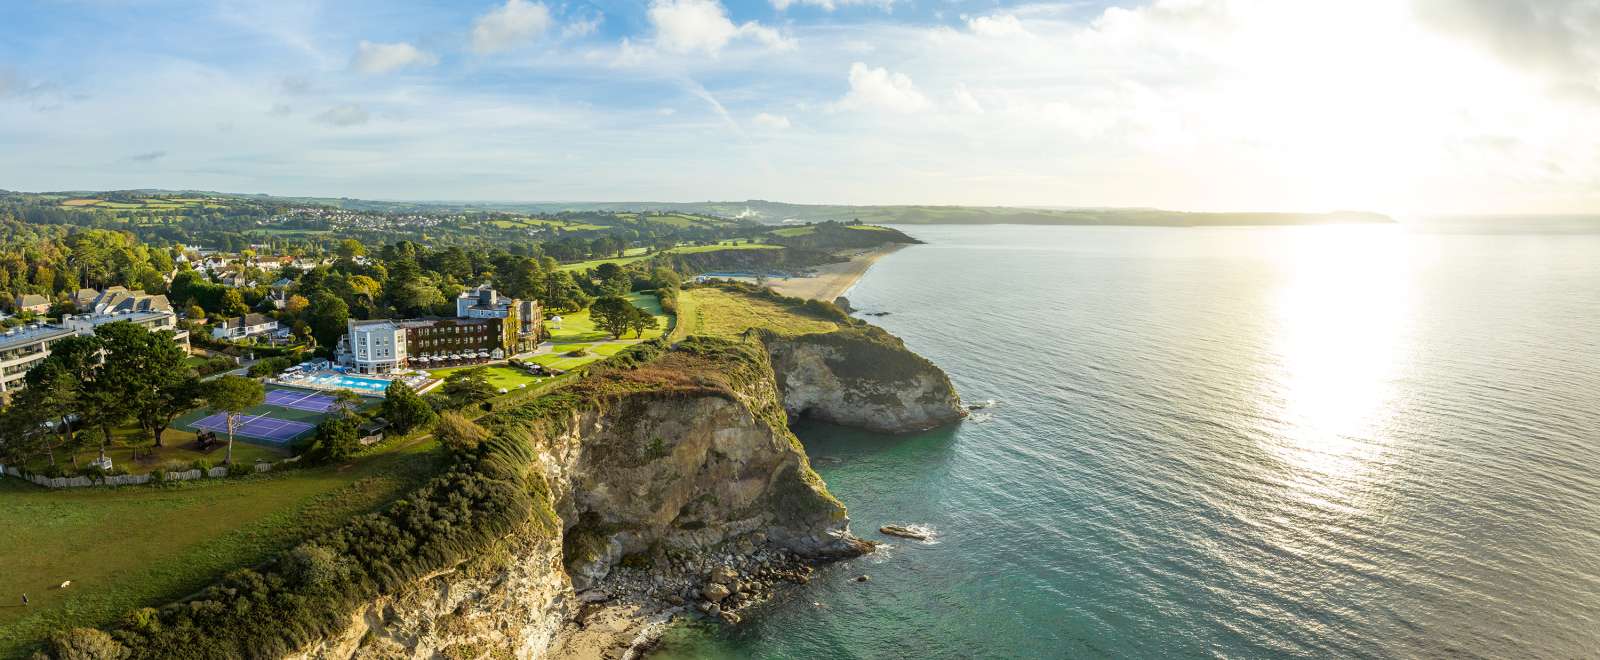 Carlyon Bay Hotel Aerial View with Cliffs and Beach in distance